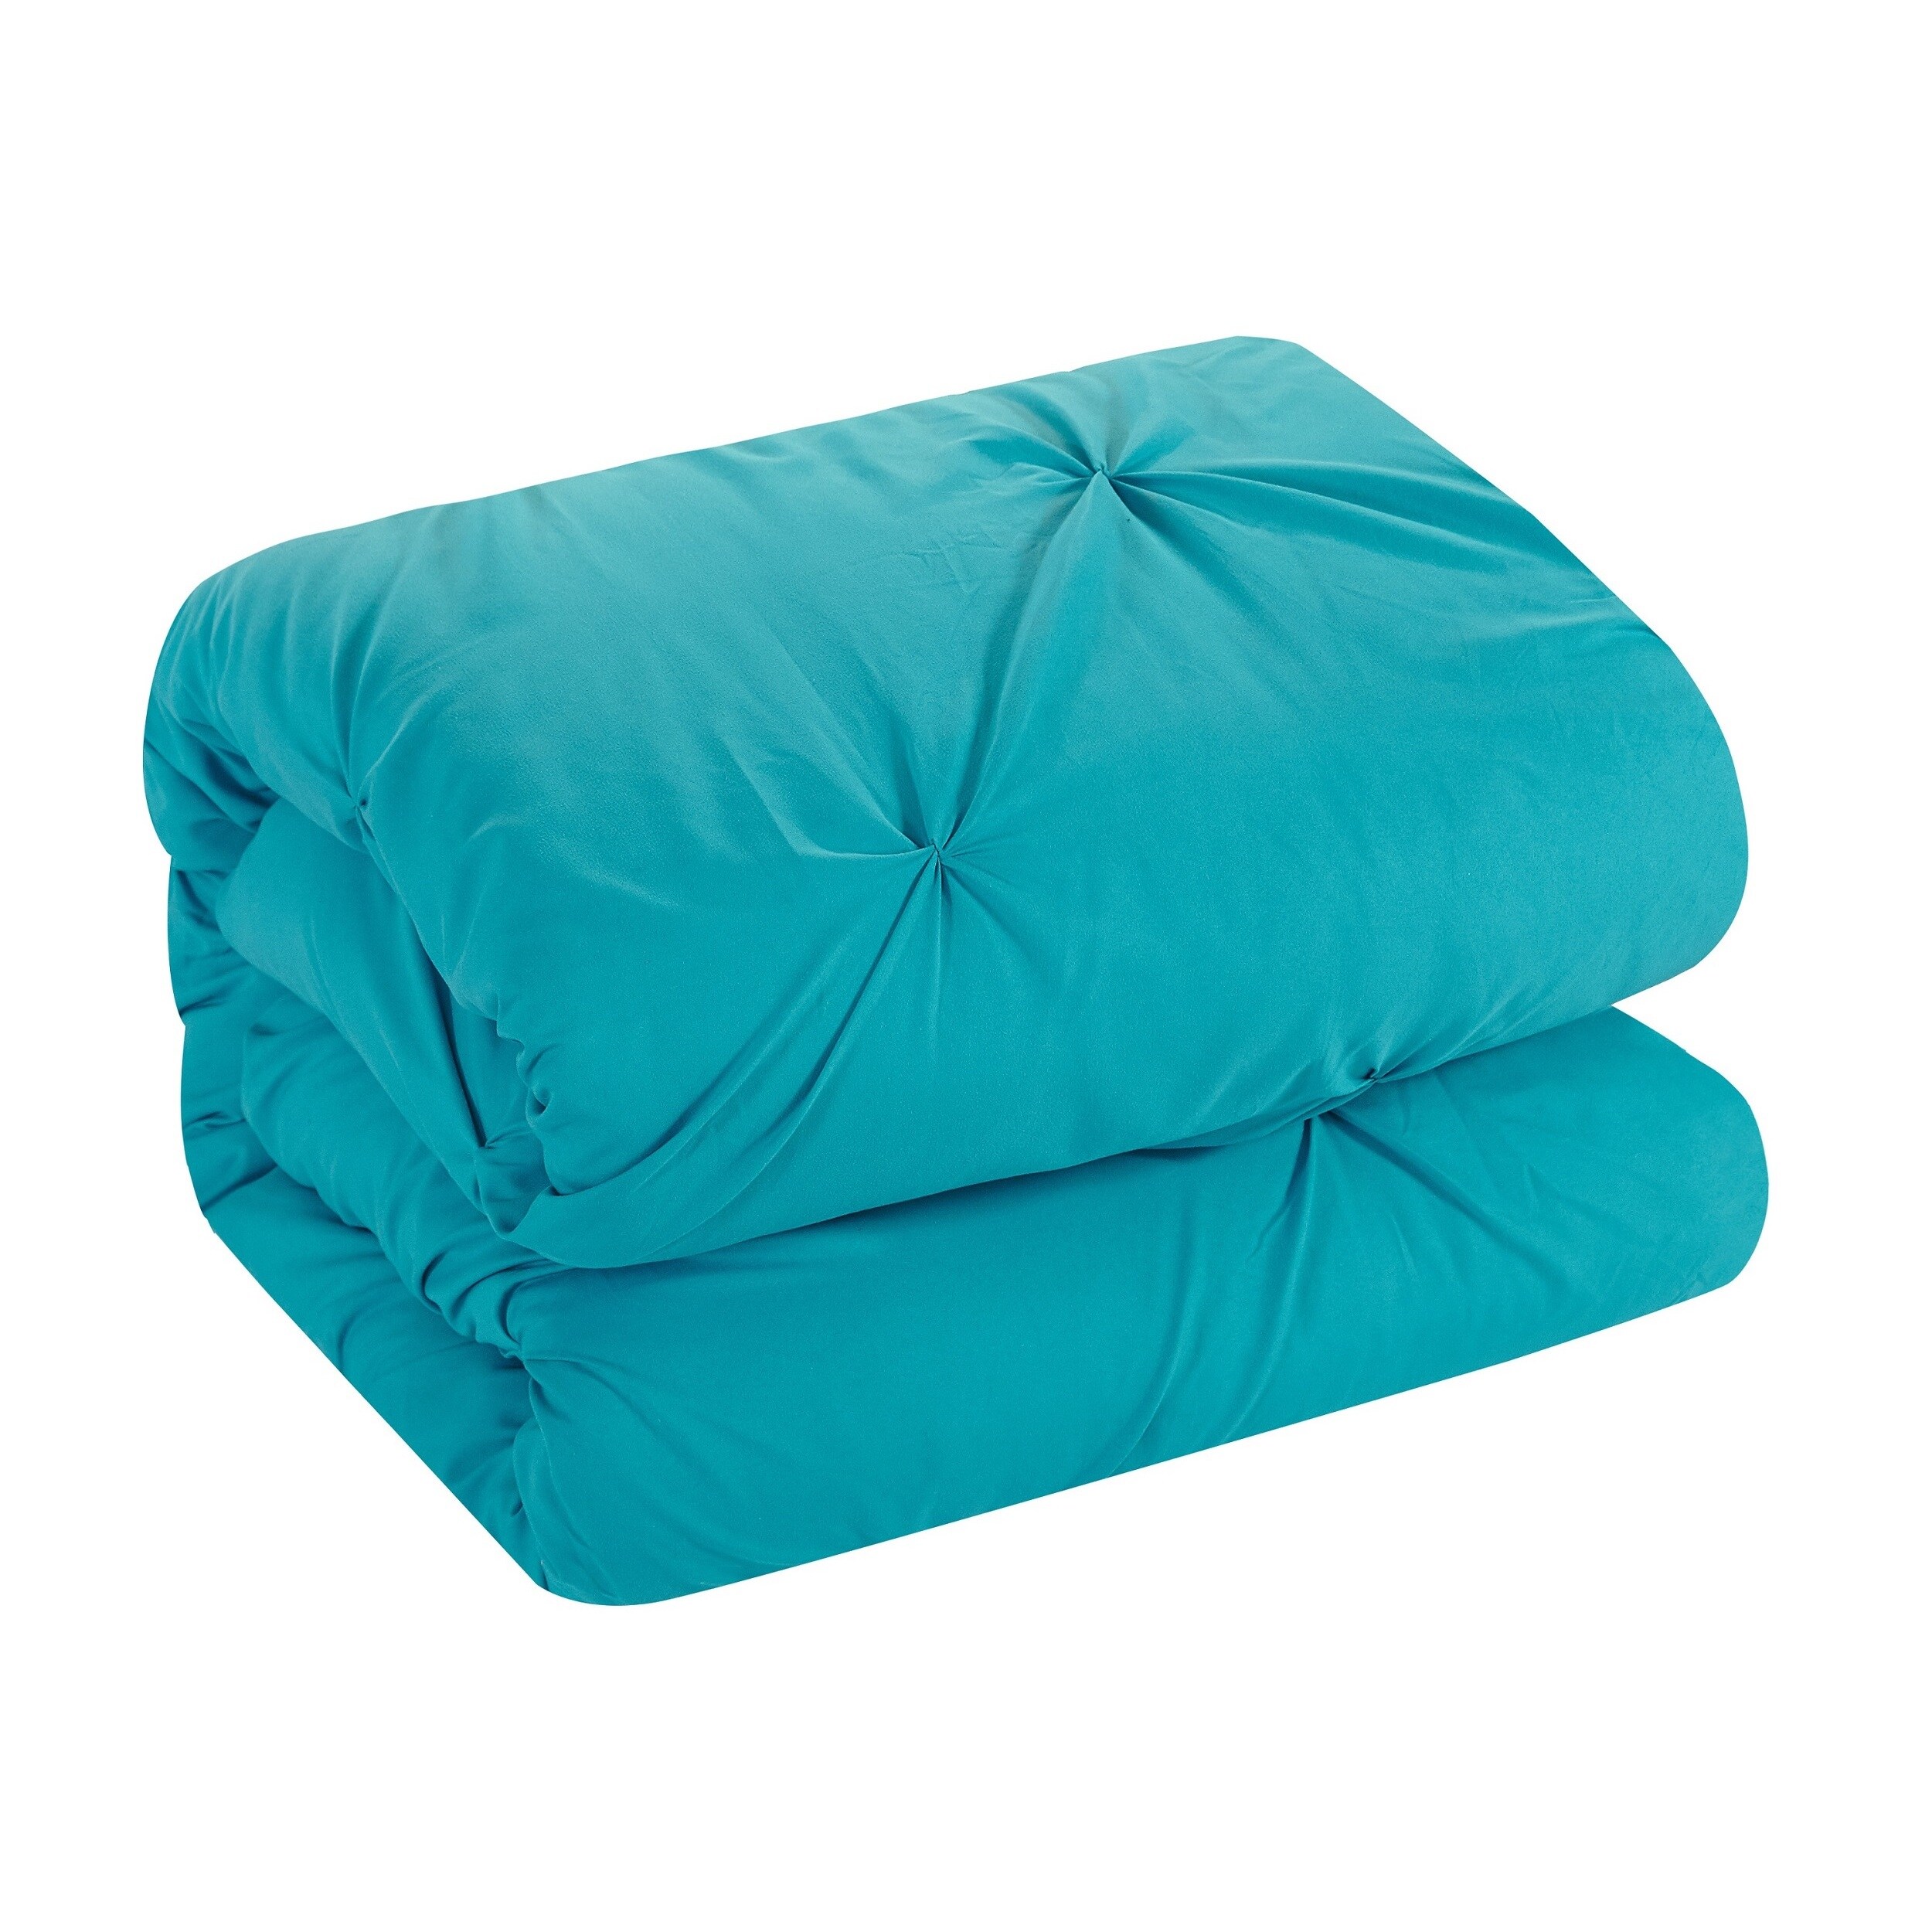 https://ak1.ostkcdn.com/images/products/12268903/Chic-Home-Whitley-Turquoise-8-Piece-Bed-in-a-Bag-Duvet-with-Sheet-Set-6e2238ab-d78c-4b7a-b976-9c74f0933a0d.jpg